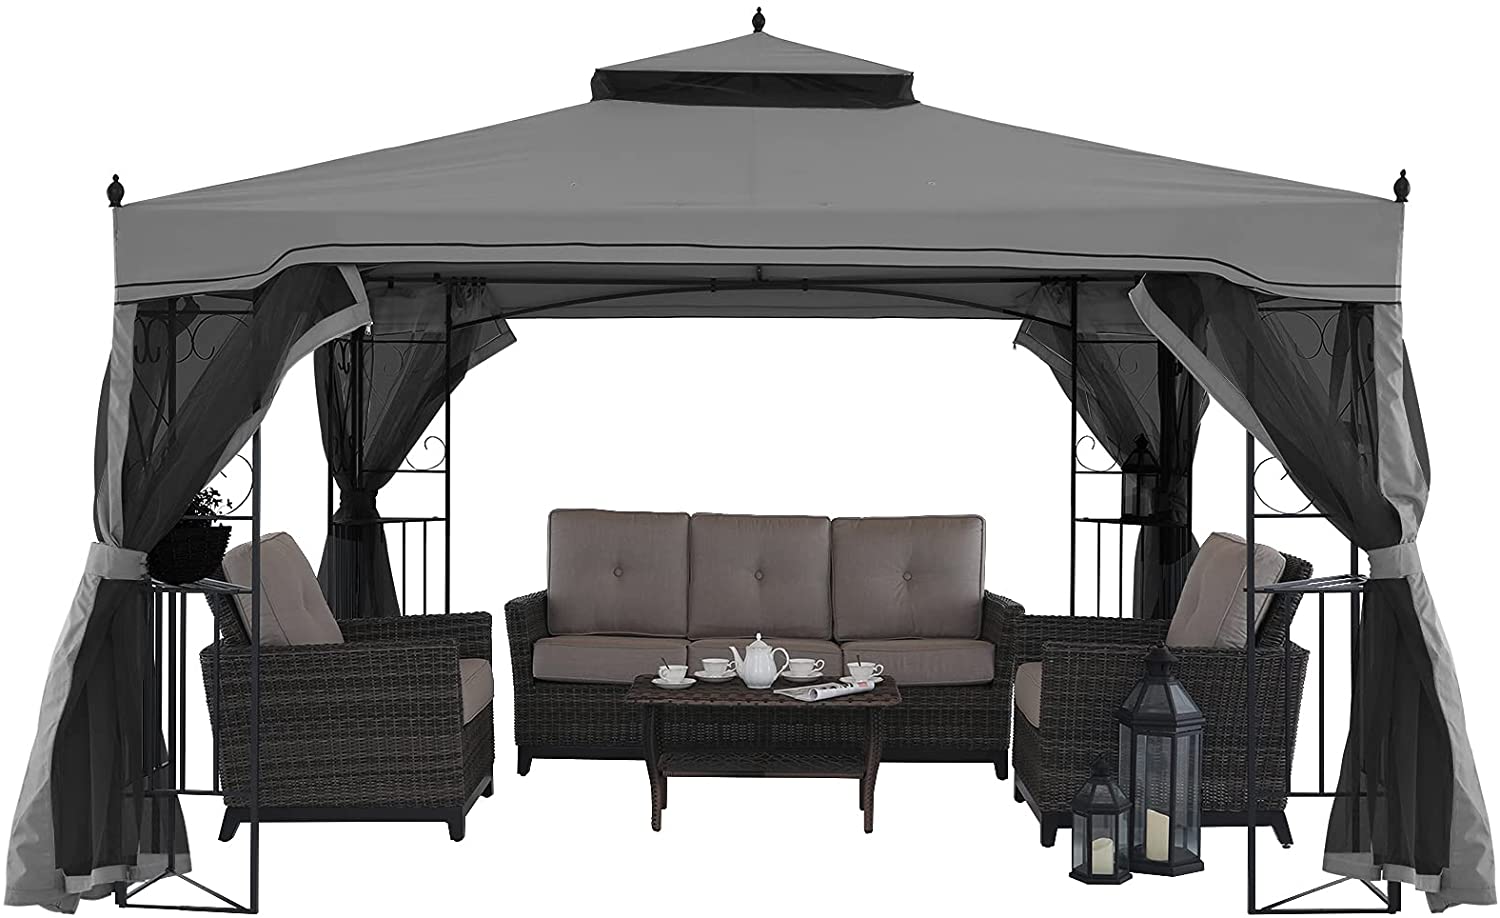 MASTERCANOPY 10x12 Patio Gazebo with Mosquito Netting Screen Walls for Lawn